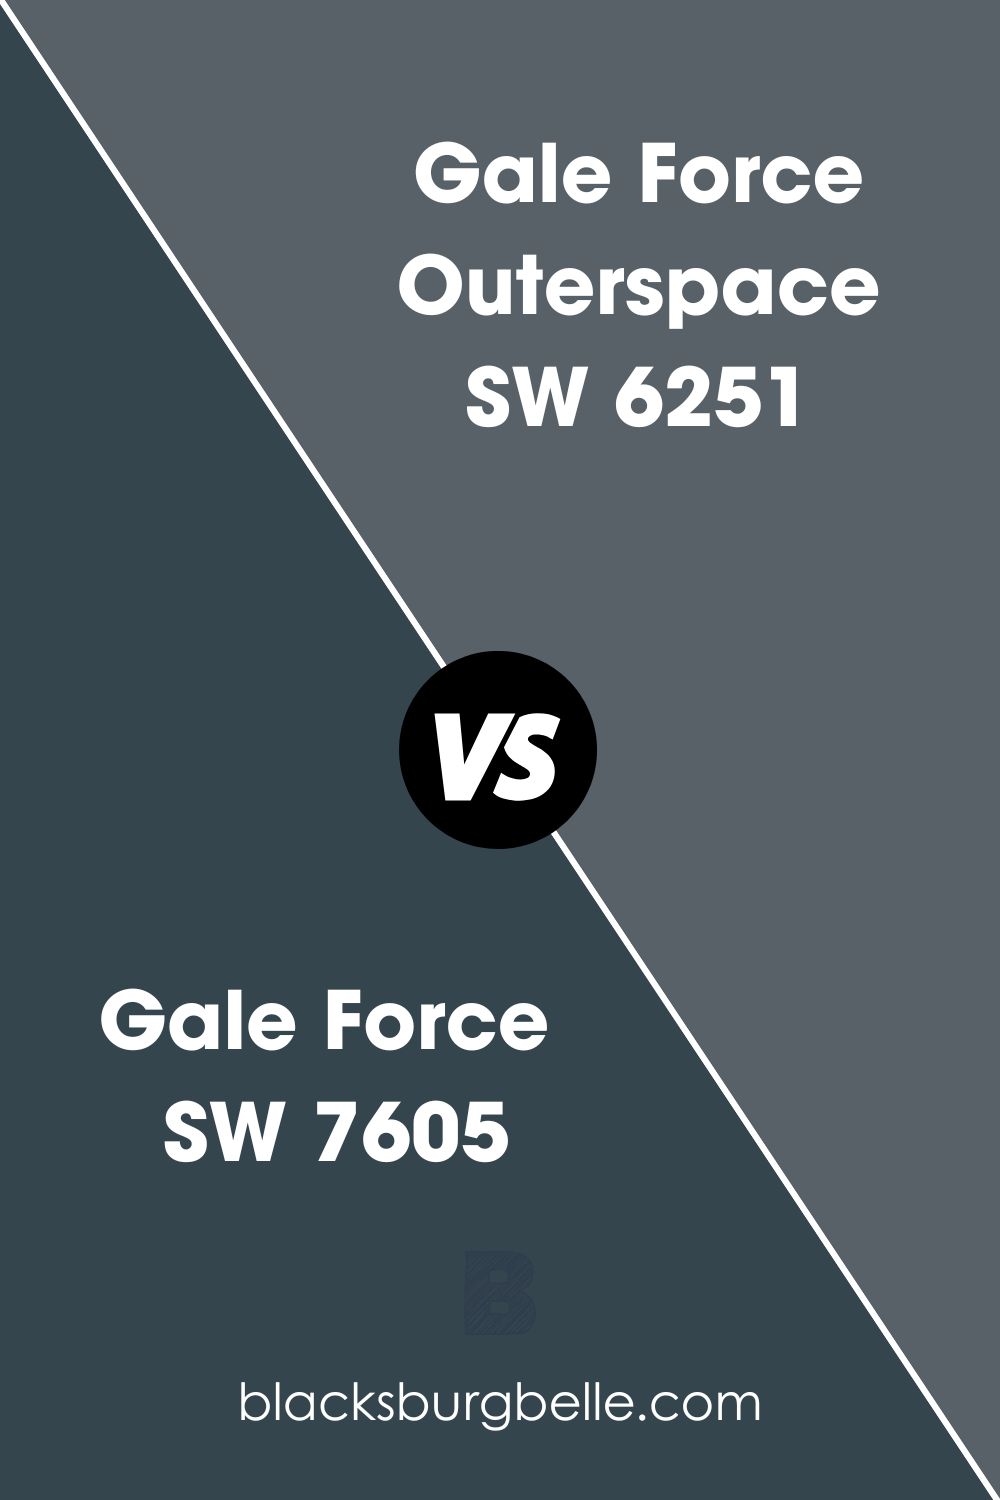 Gale Force Outerspace SW 6251